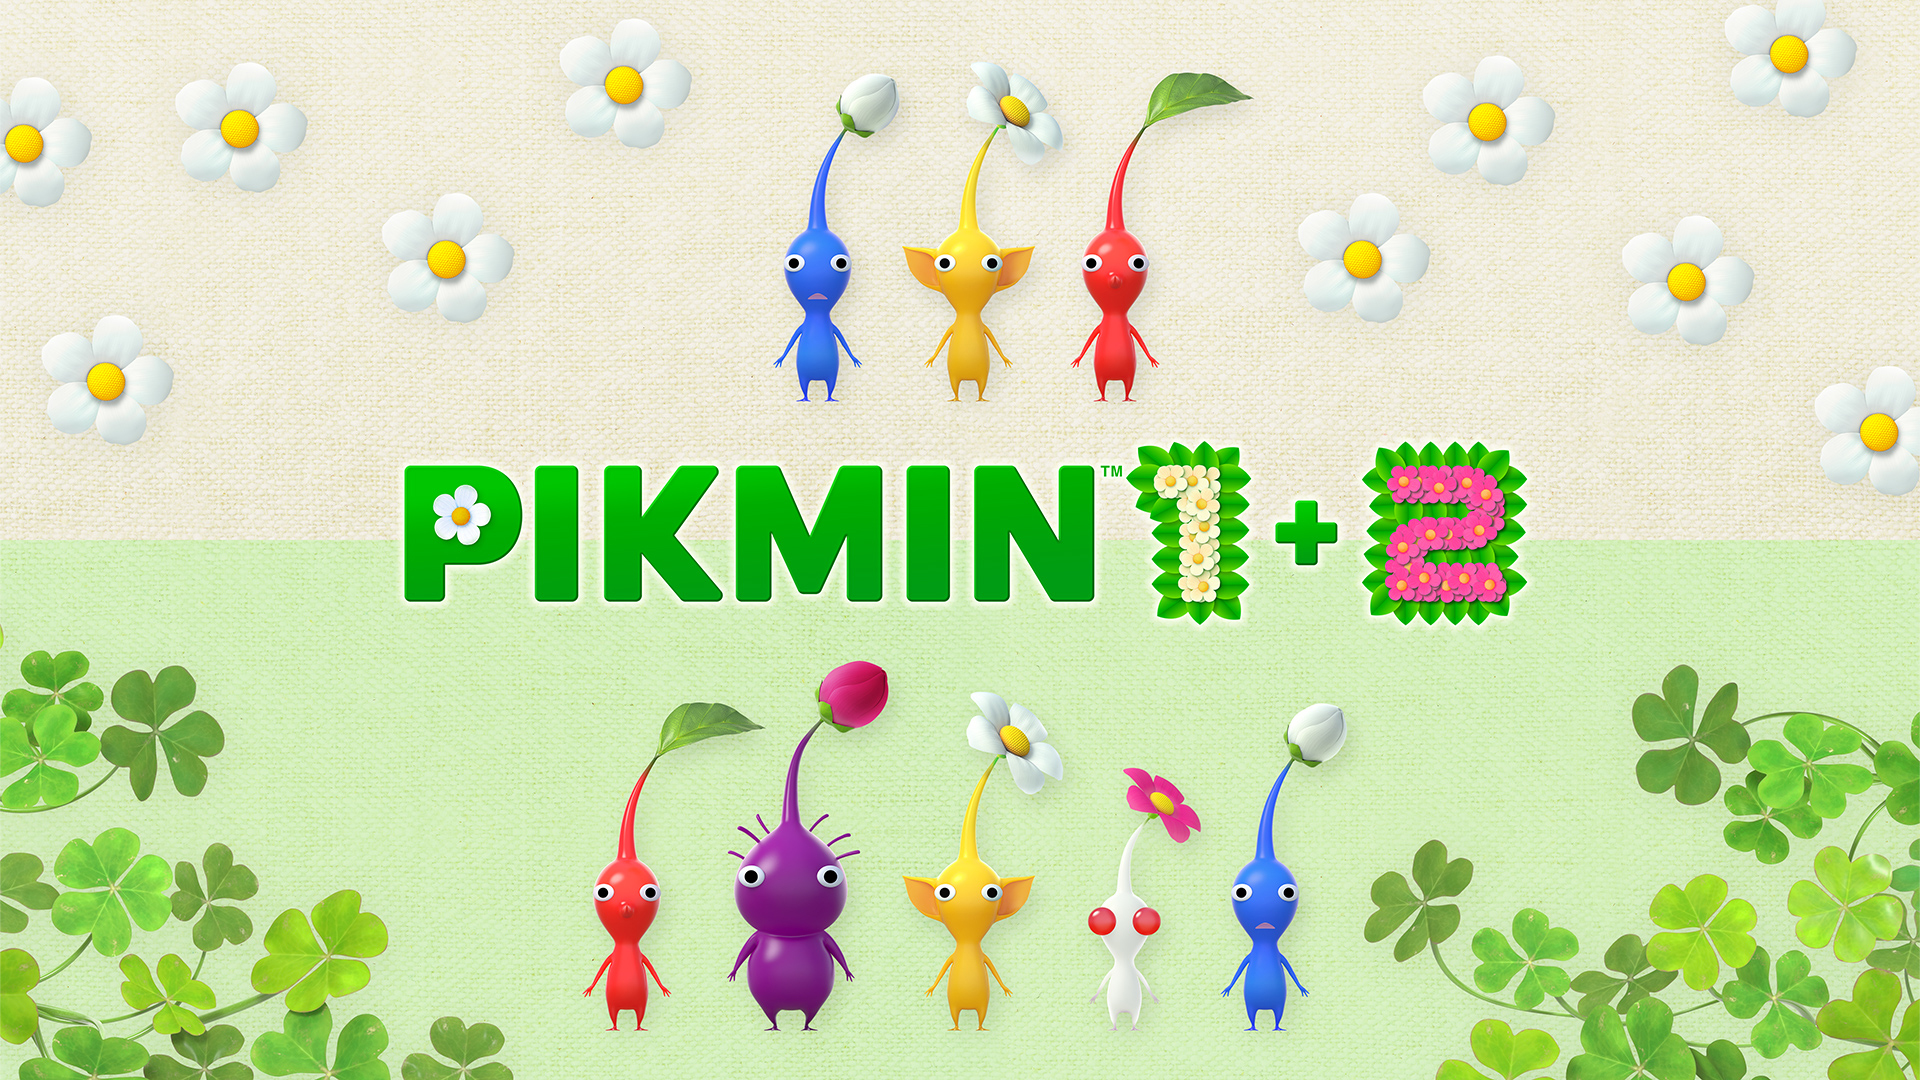 Pikmin 1 & Pikmin 2 HD versions for Nintendo Switch